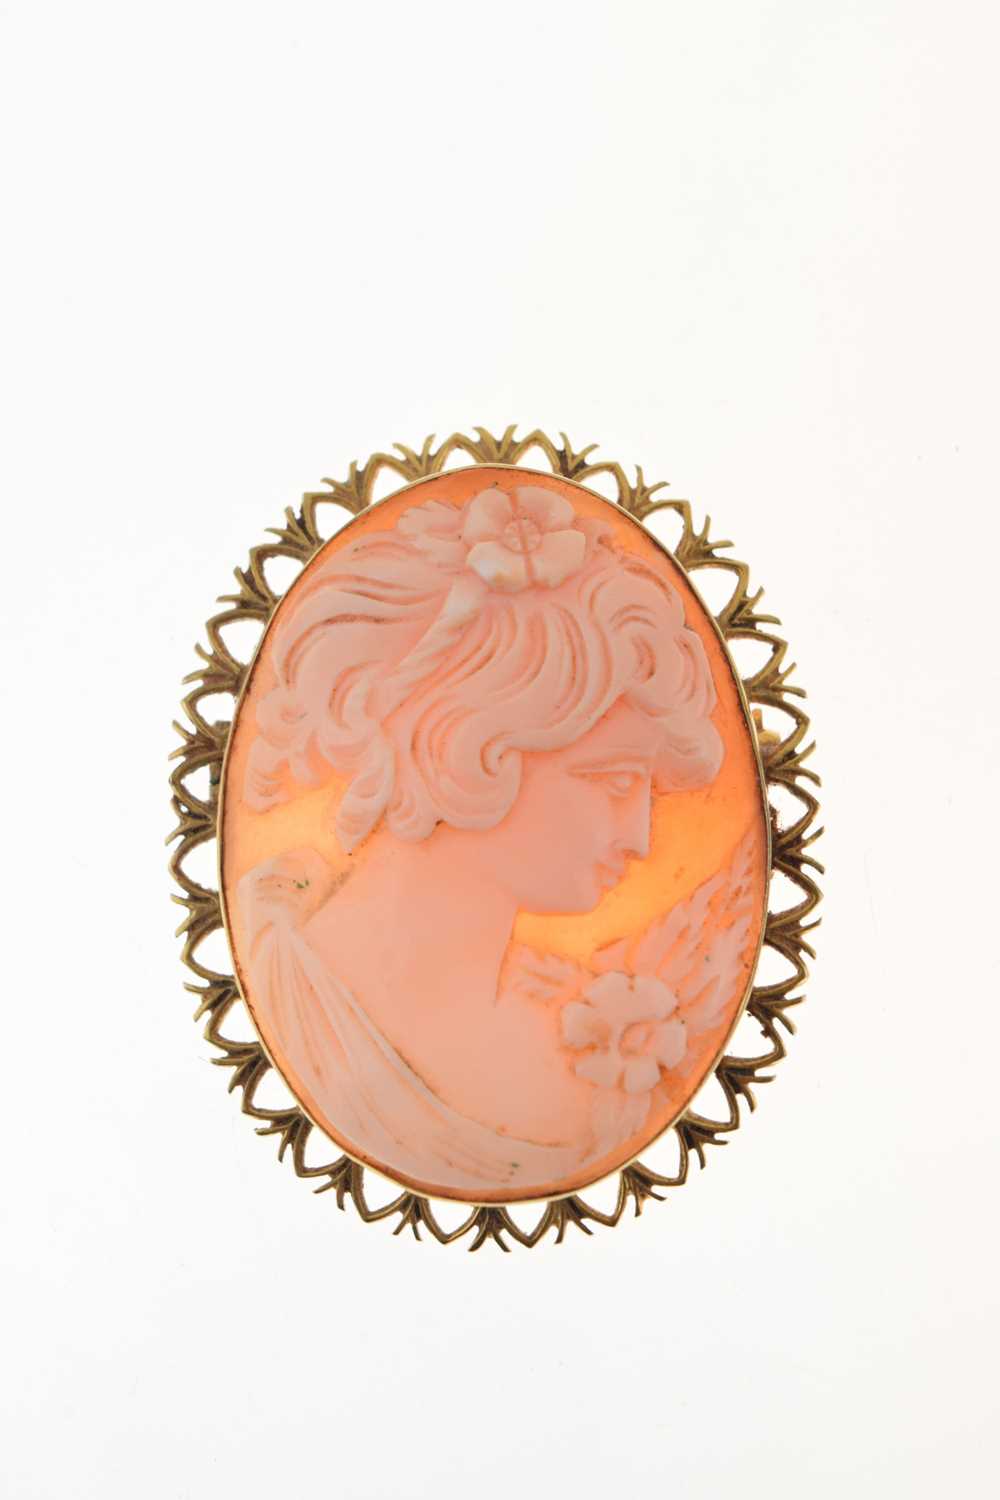 Modern 9ct gold cameo brooch - Image 7 of 7